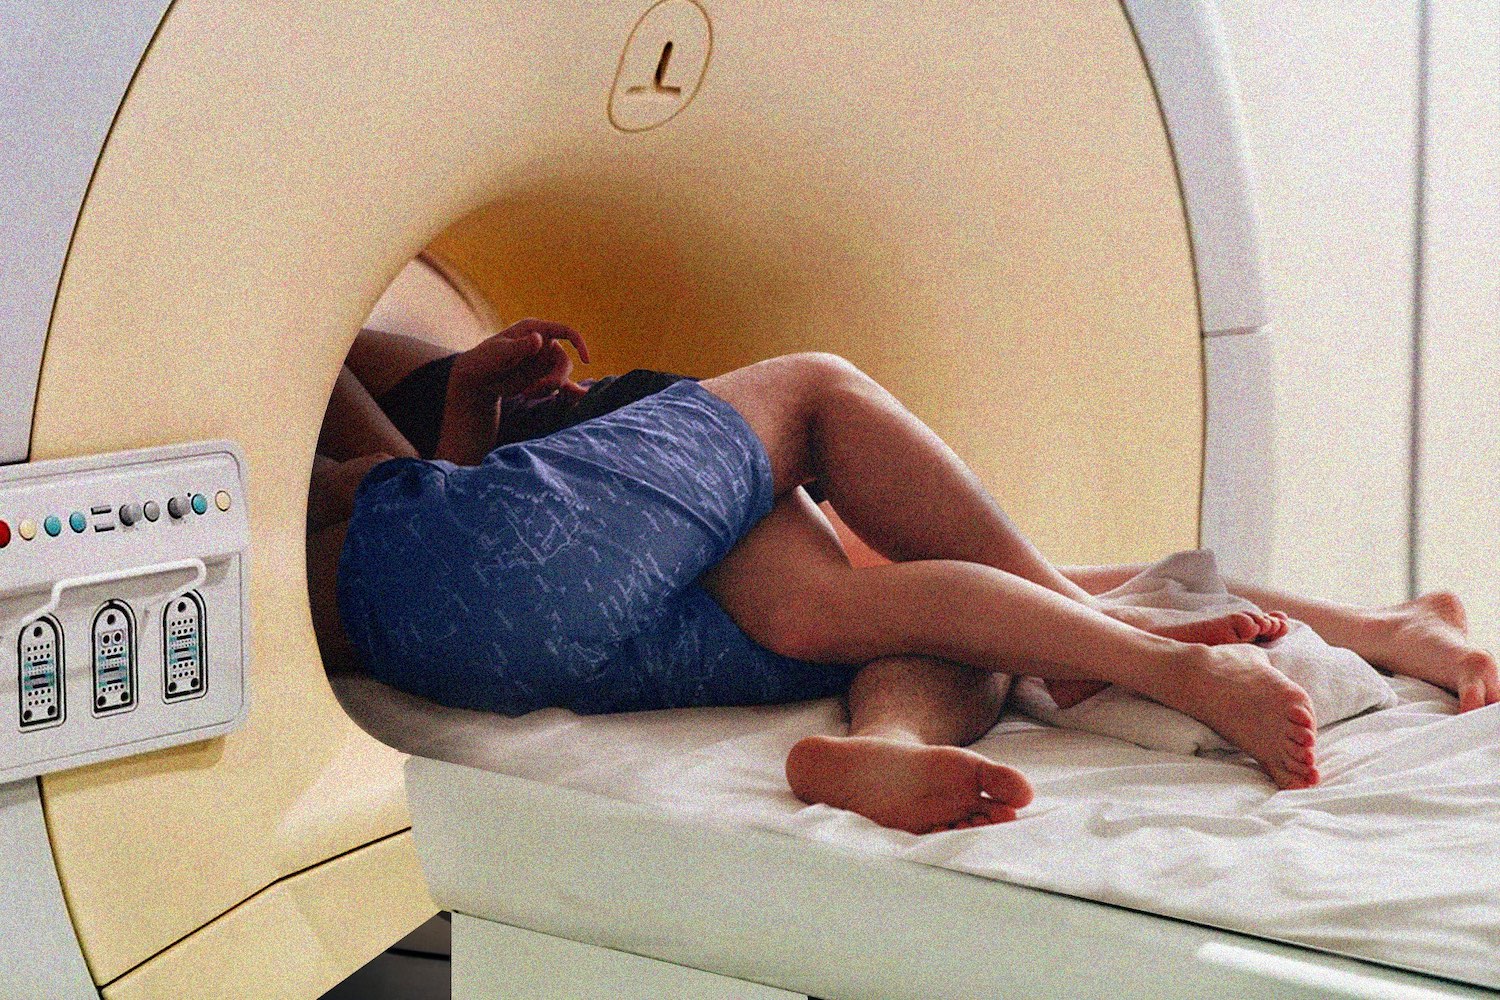 Sex Juppun - The Story of the Couple Who Shagged in an MRI Machine for Science